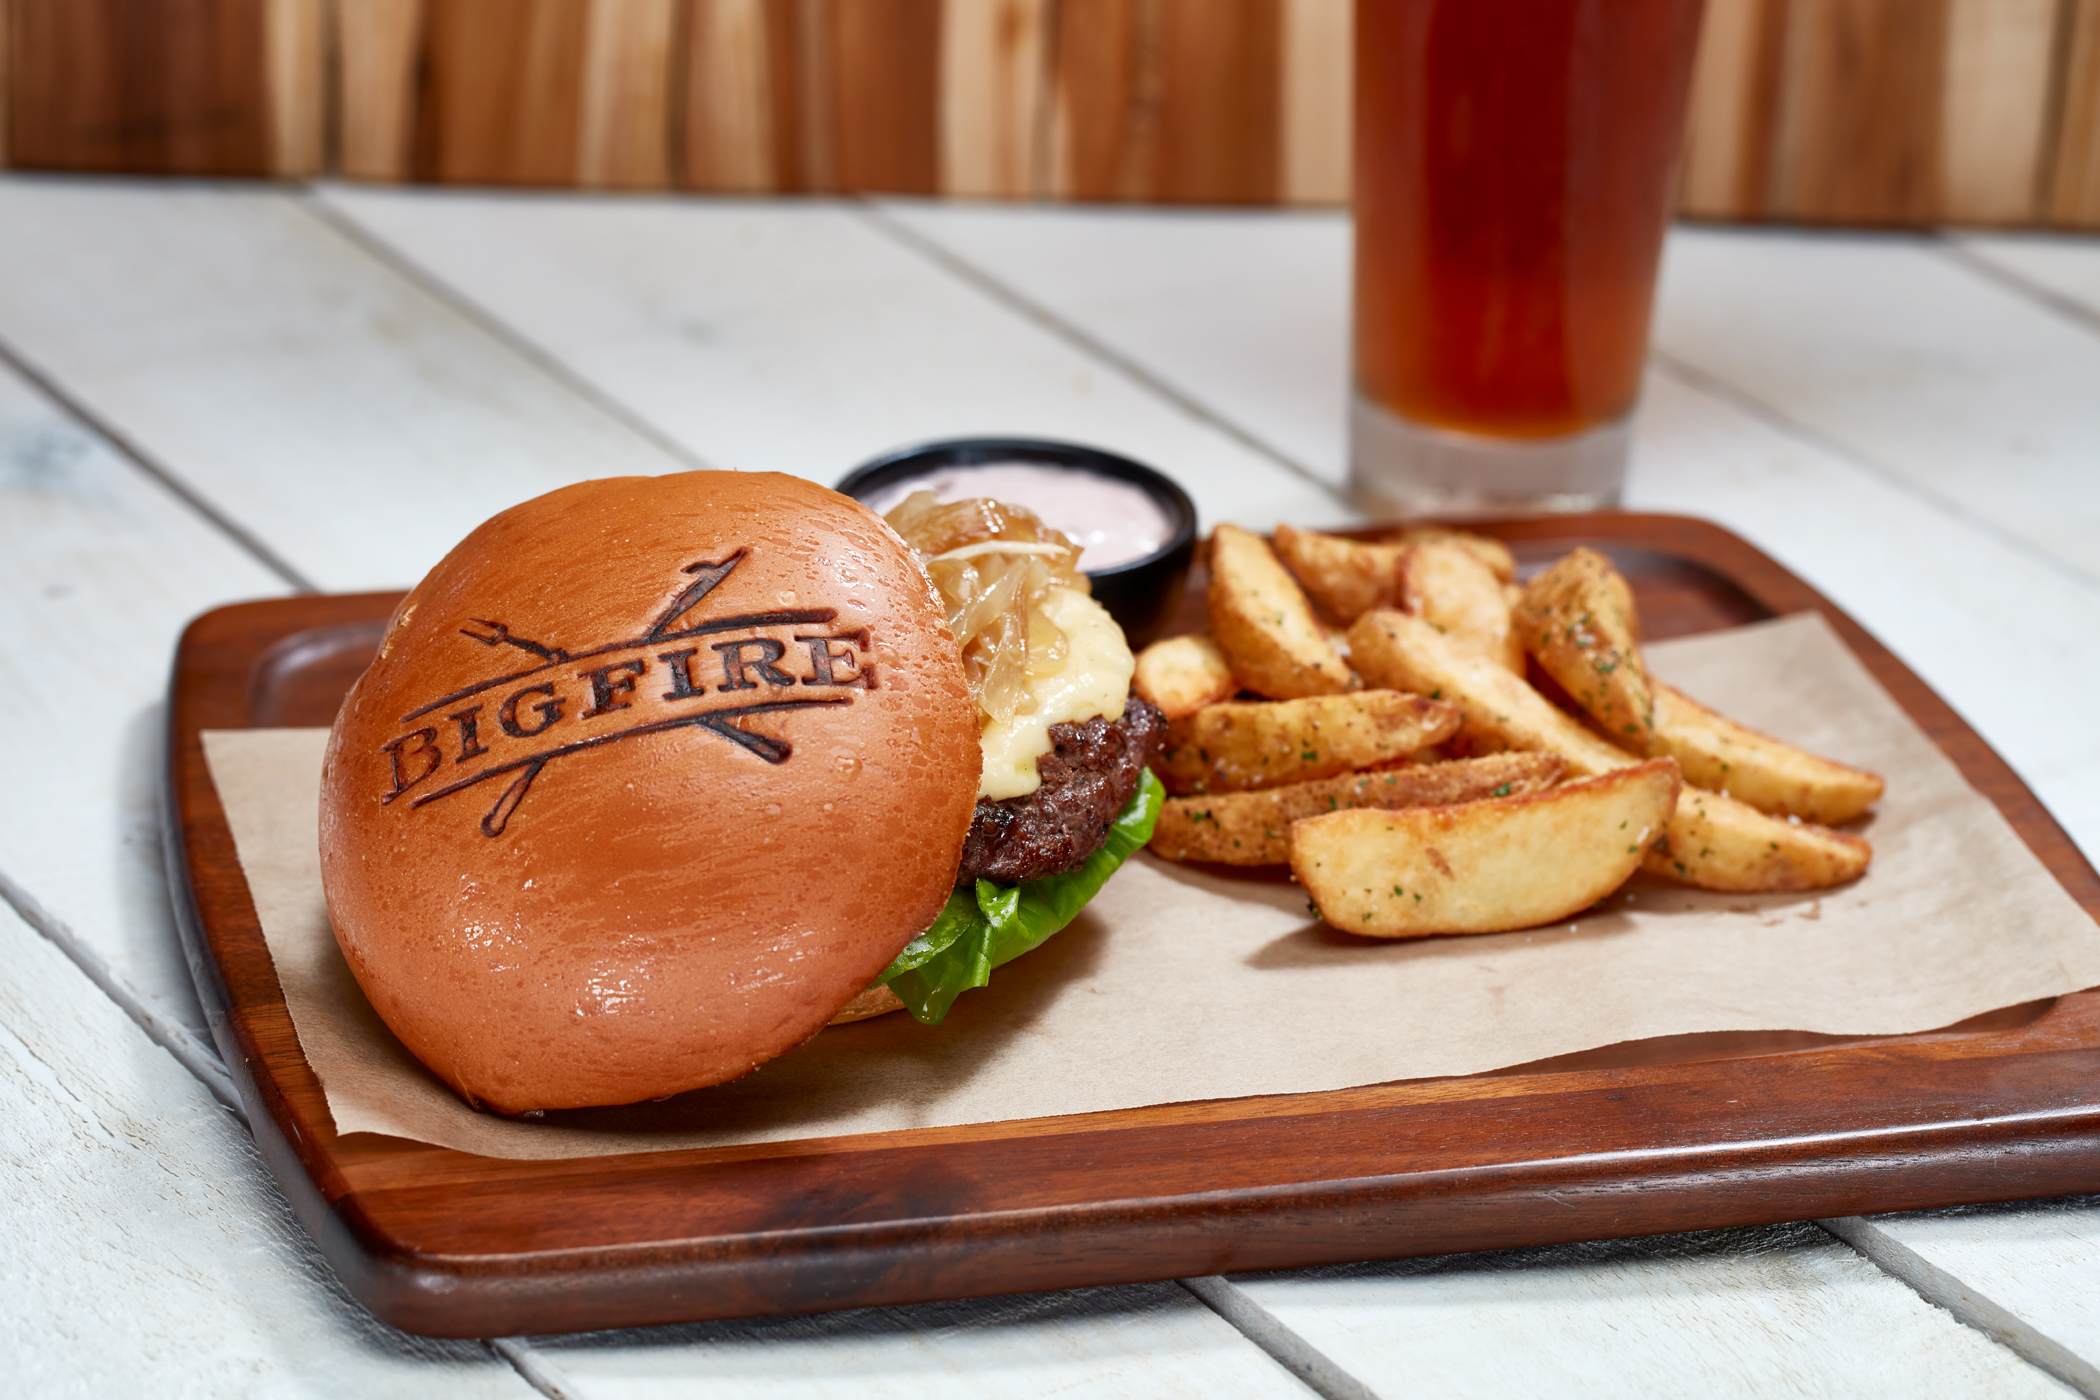 The signature bison burger comes with a side of fries and the restaurant’s logo seared into the bun.